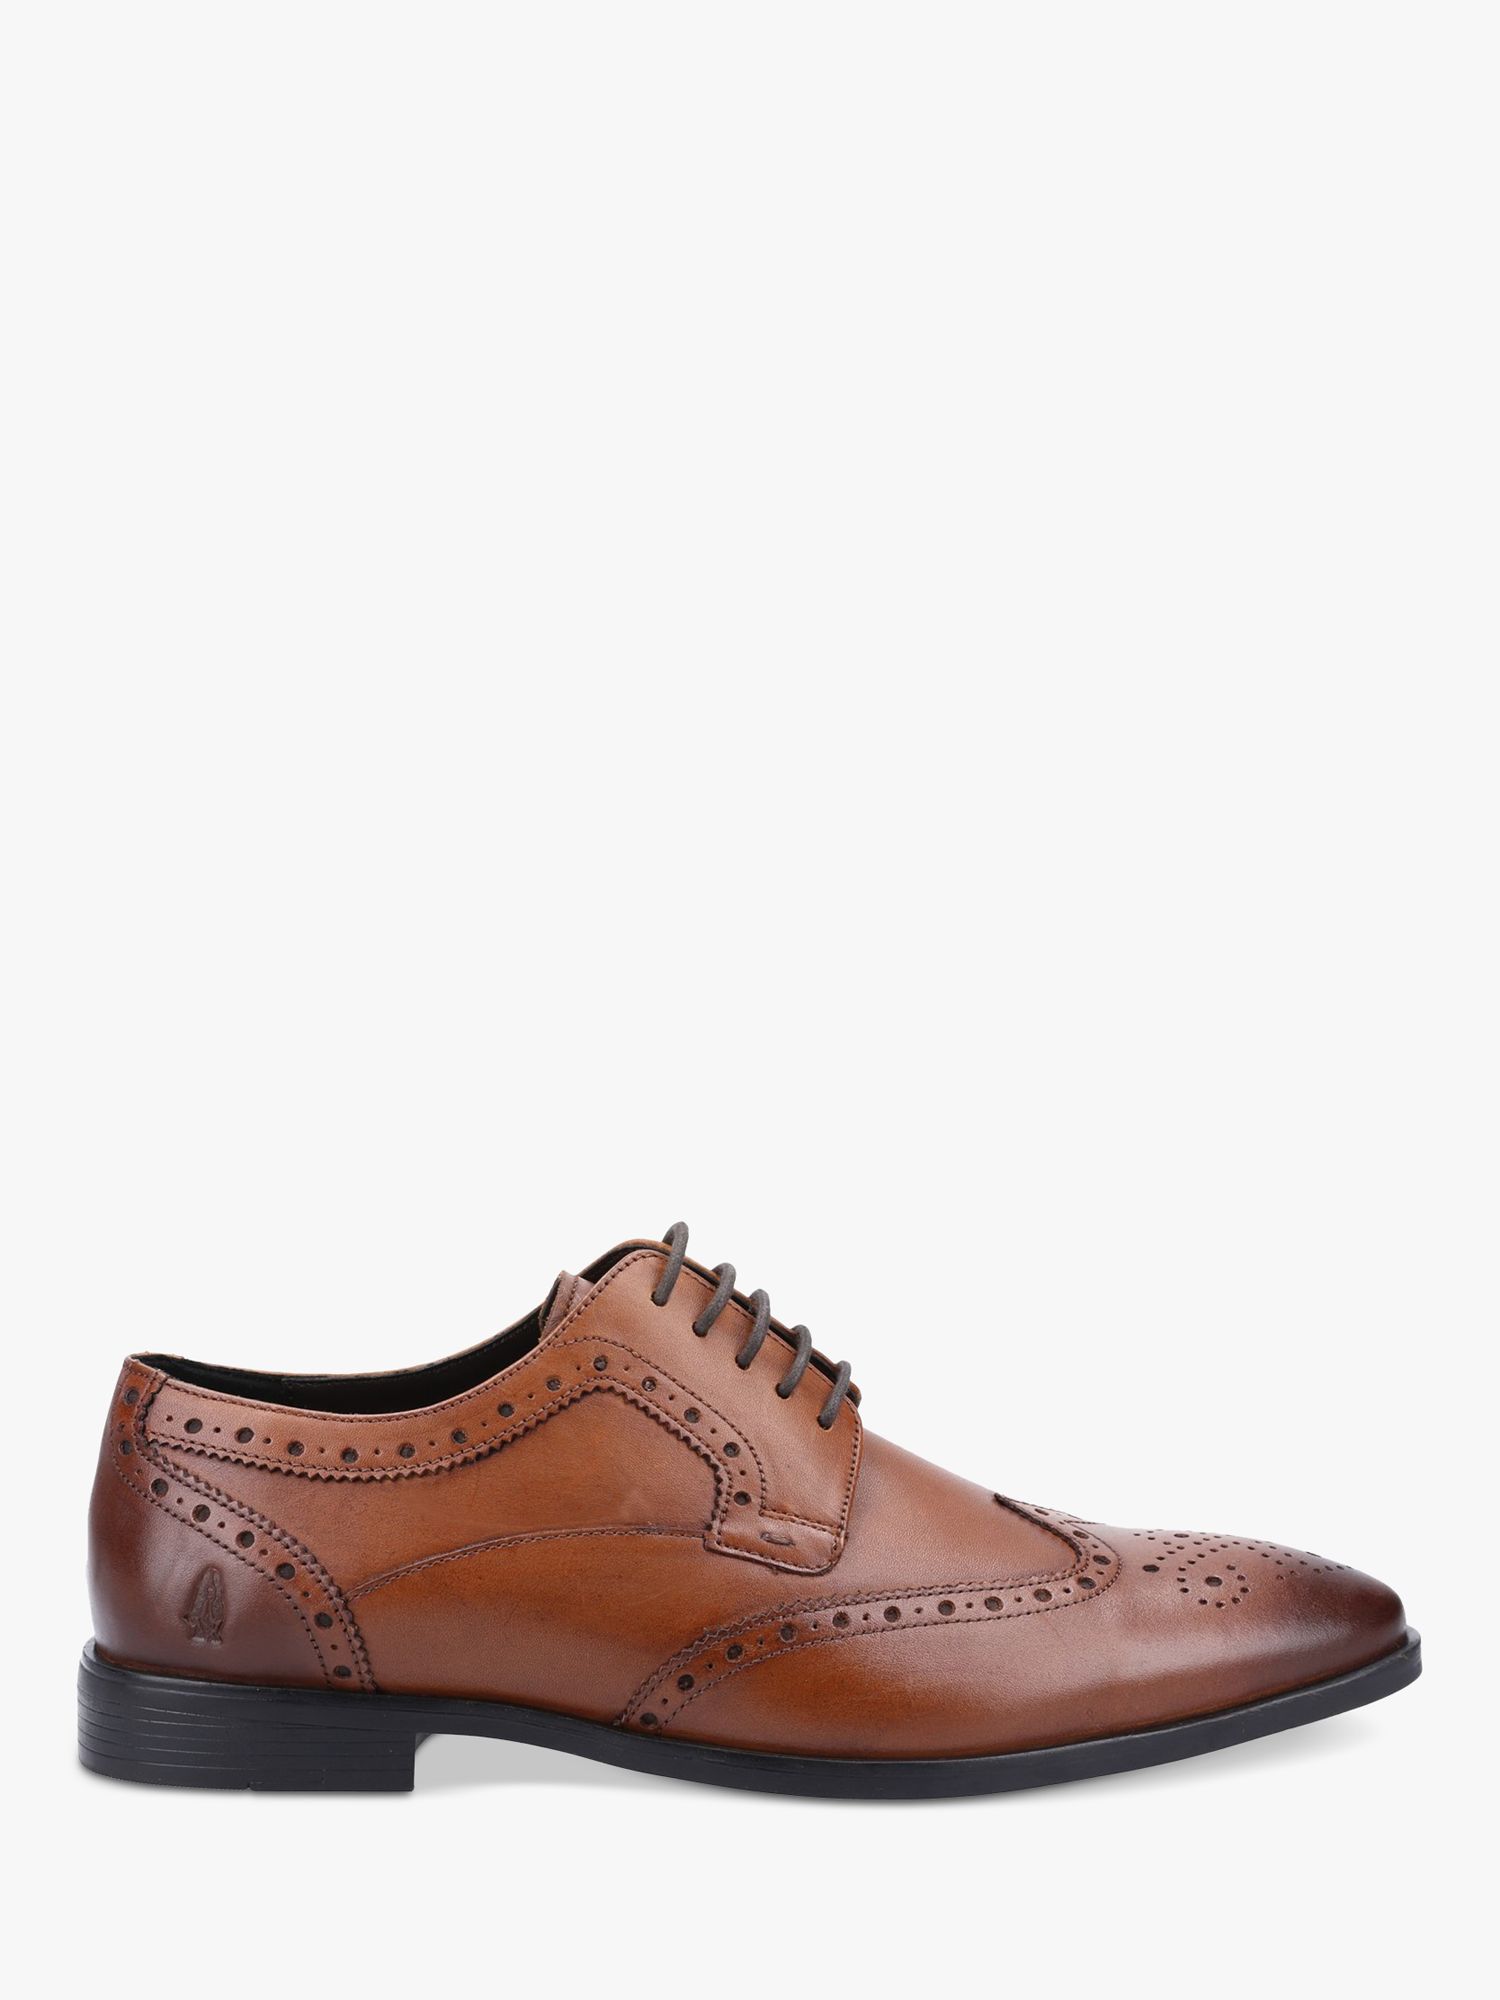 Hush Puppies Elliot Brogue Leather Shoes, Tan, 10